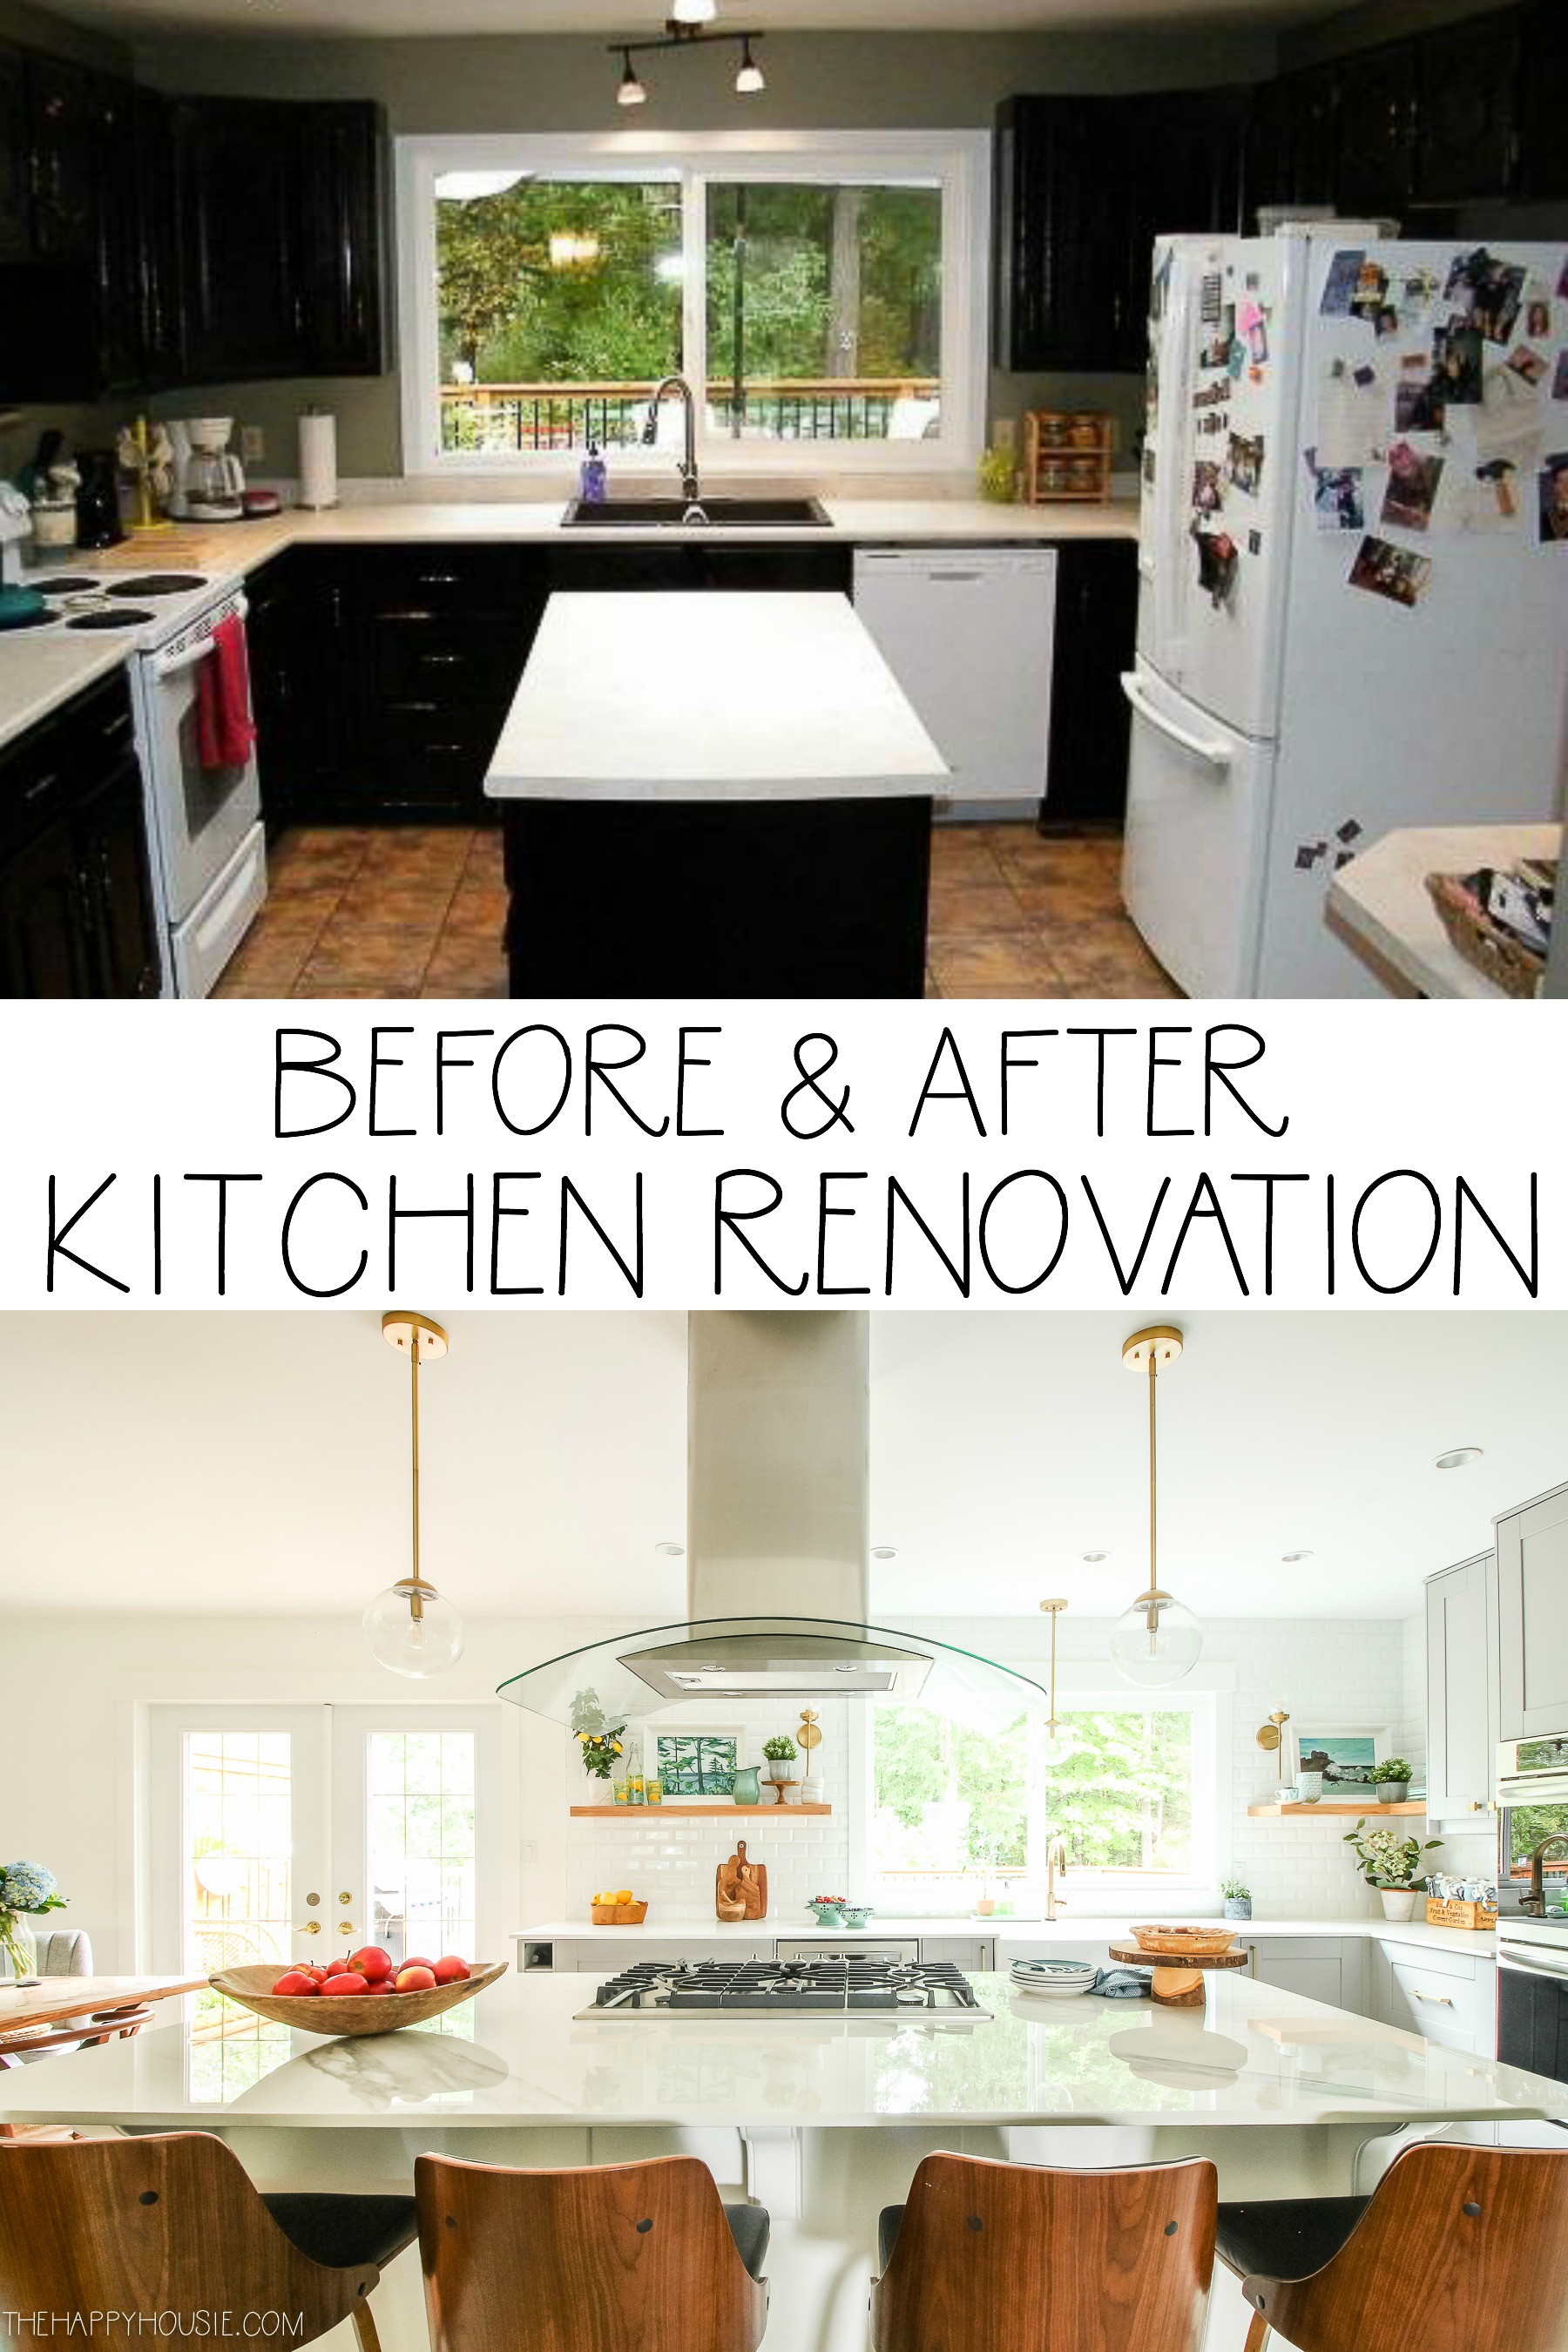 How to Remodel a Small Kitchen - Groysman Construction Remodeling